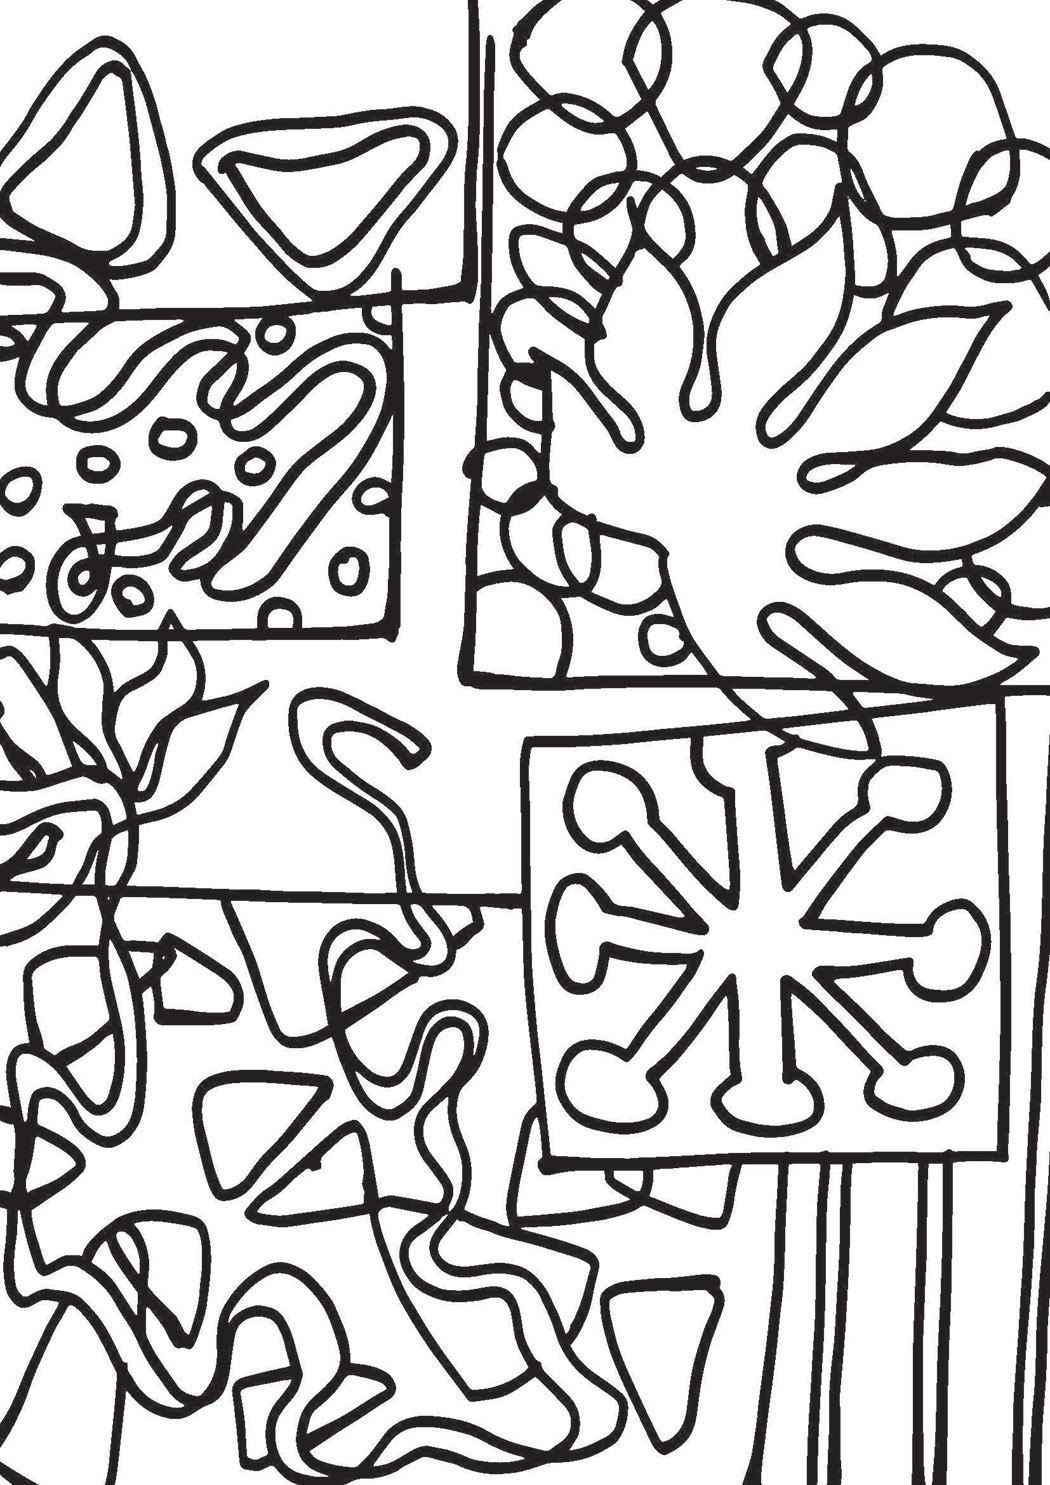 Download 80+ Arts Culture Famous Paintings Henri Matisse Coloring Pages